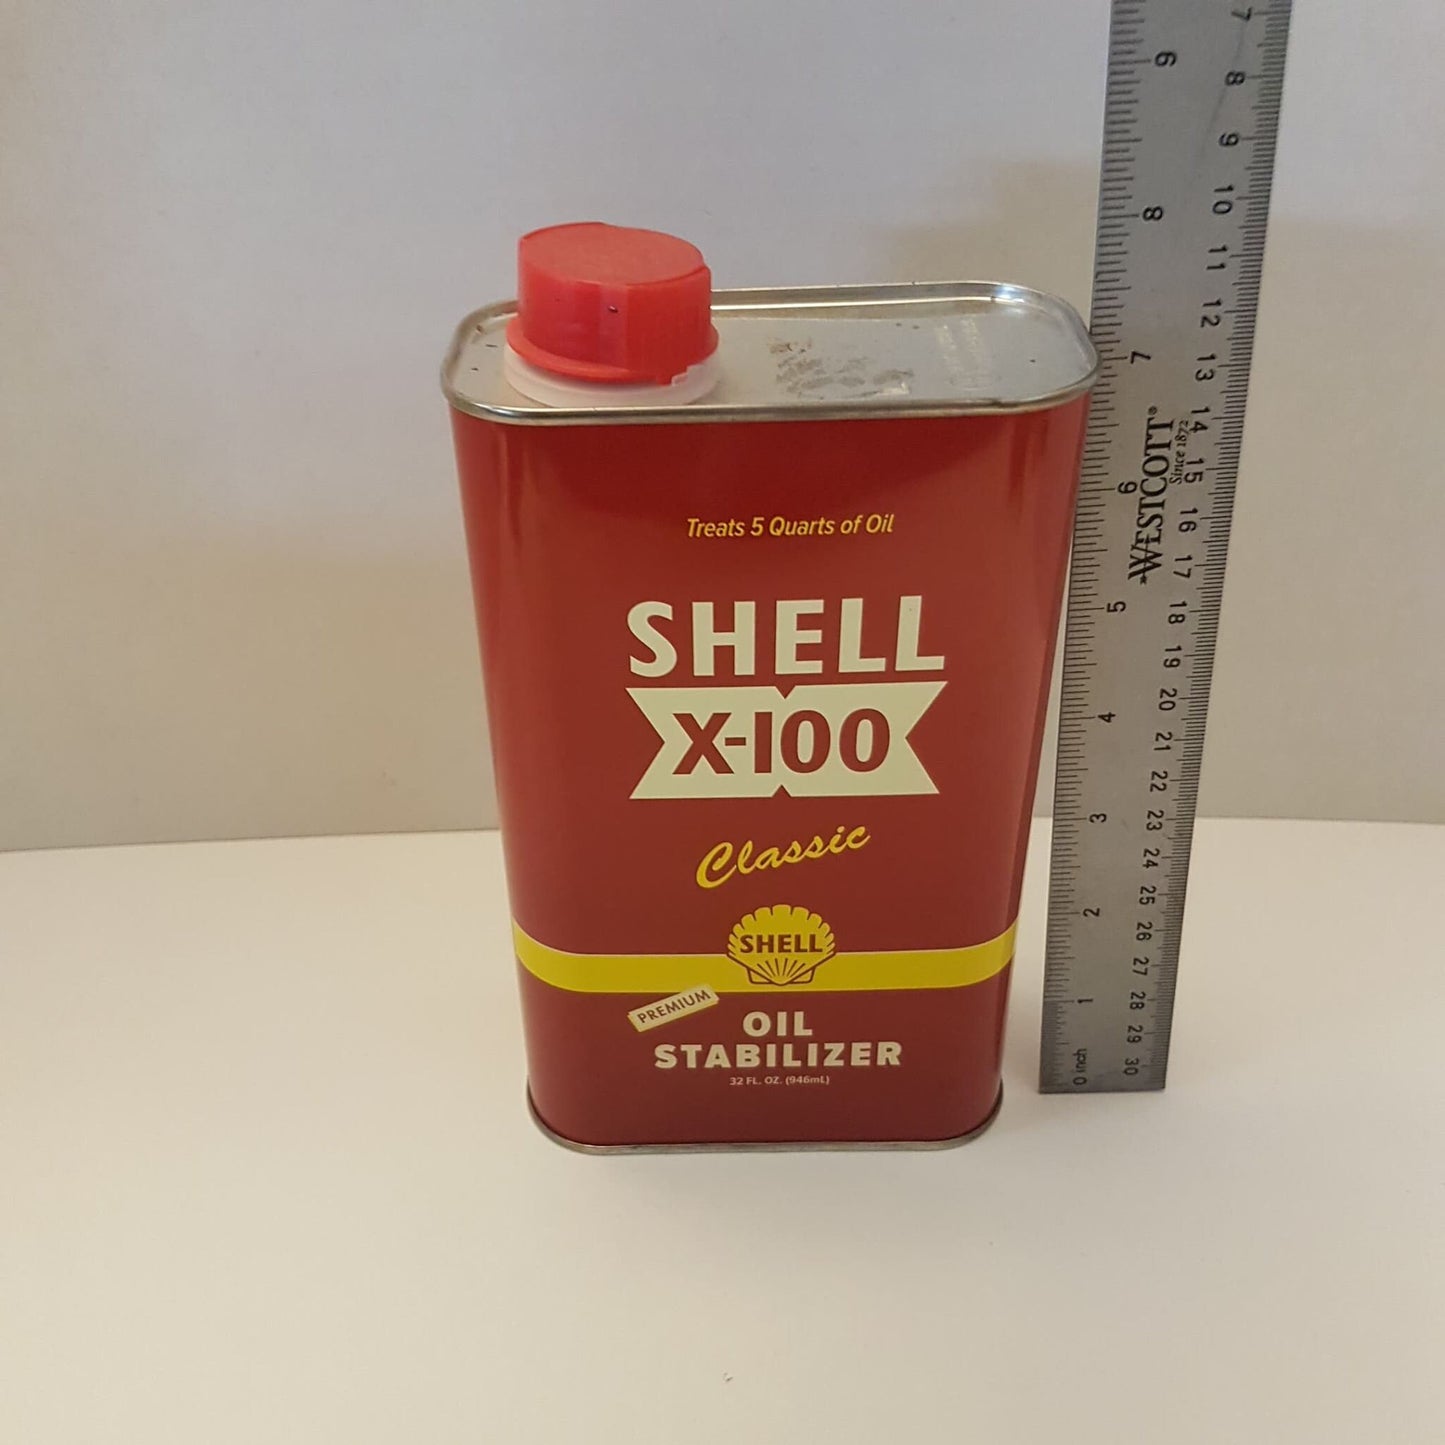 shell x-100 oil stabilizer advertising tin oil can